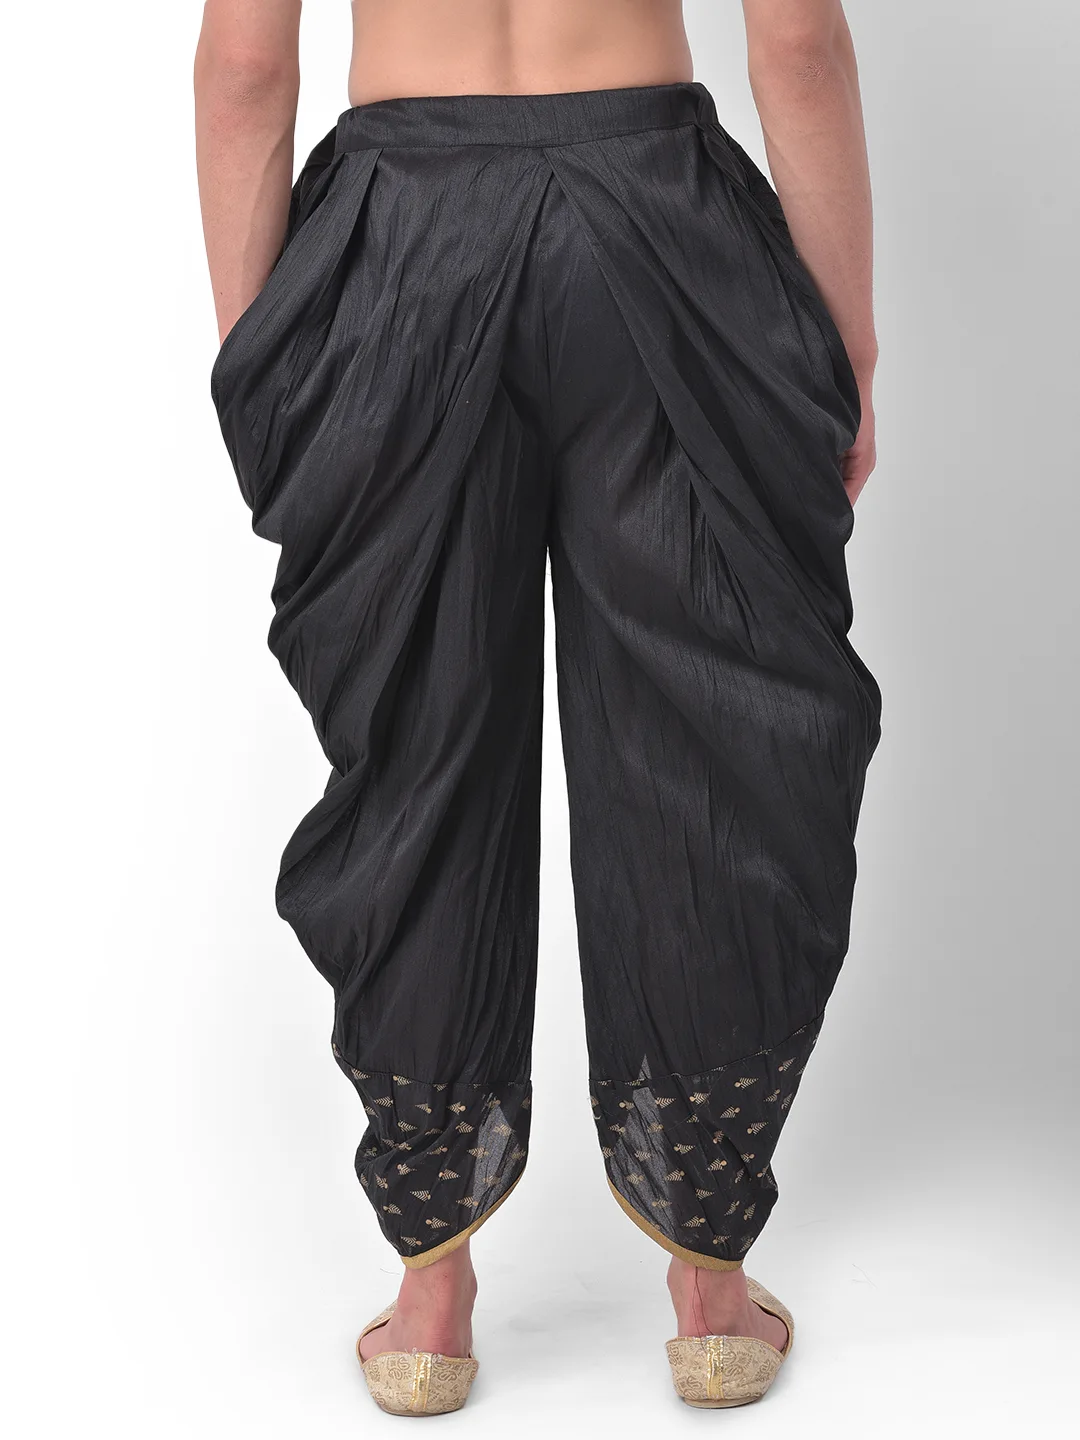 W Solid Women Dhoti - Buy BLACK W Solid Women Dhoti Online at Best Prices  in India | Flipkart.com